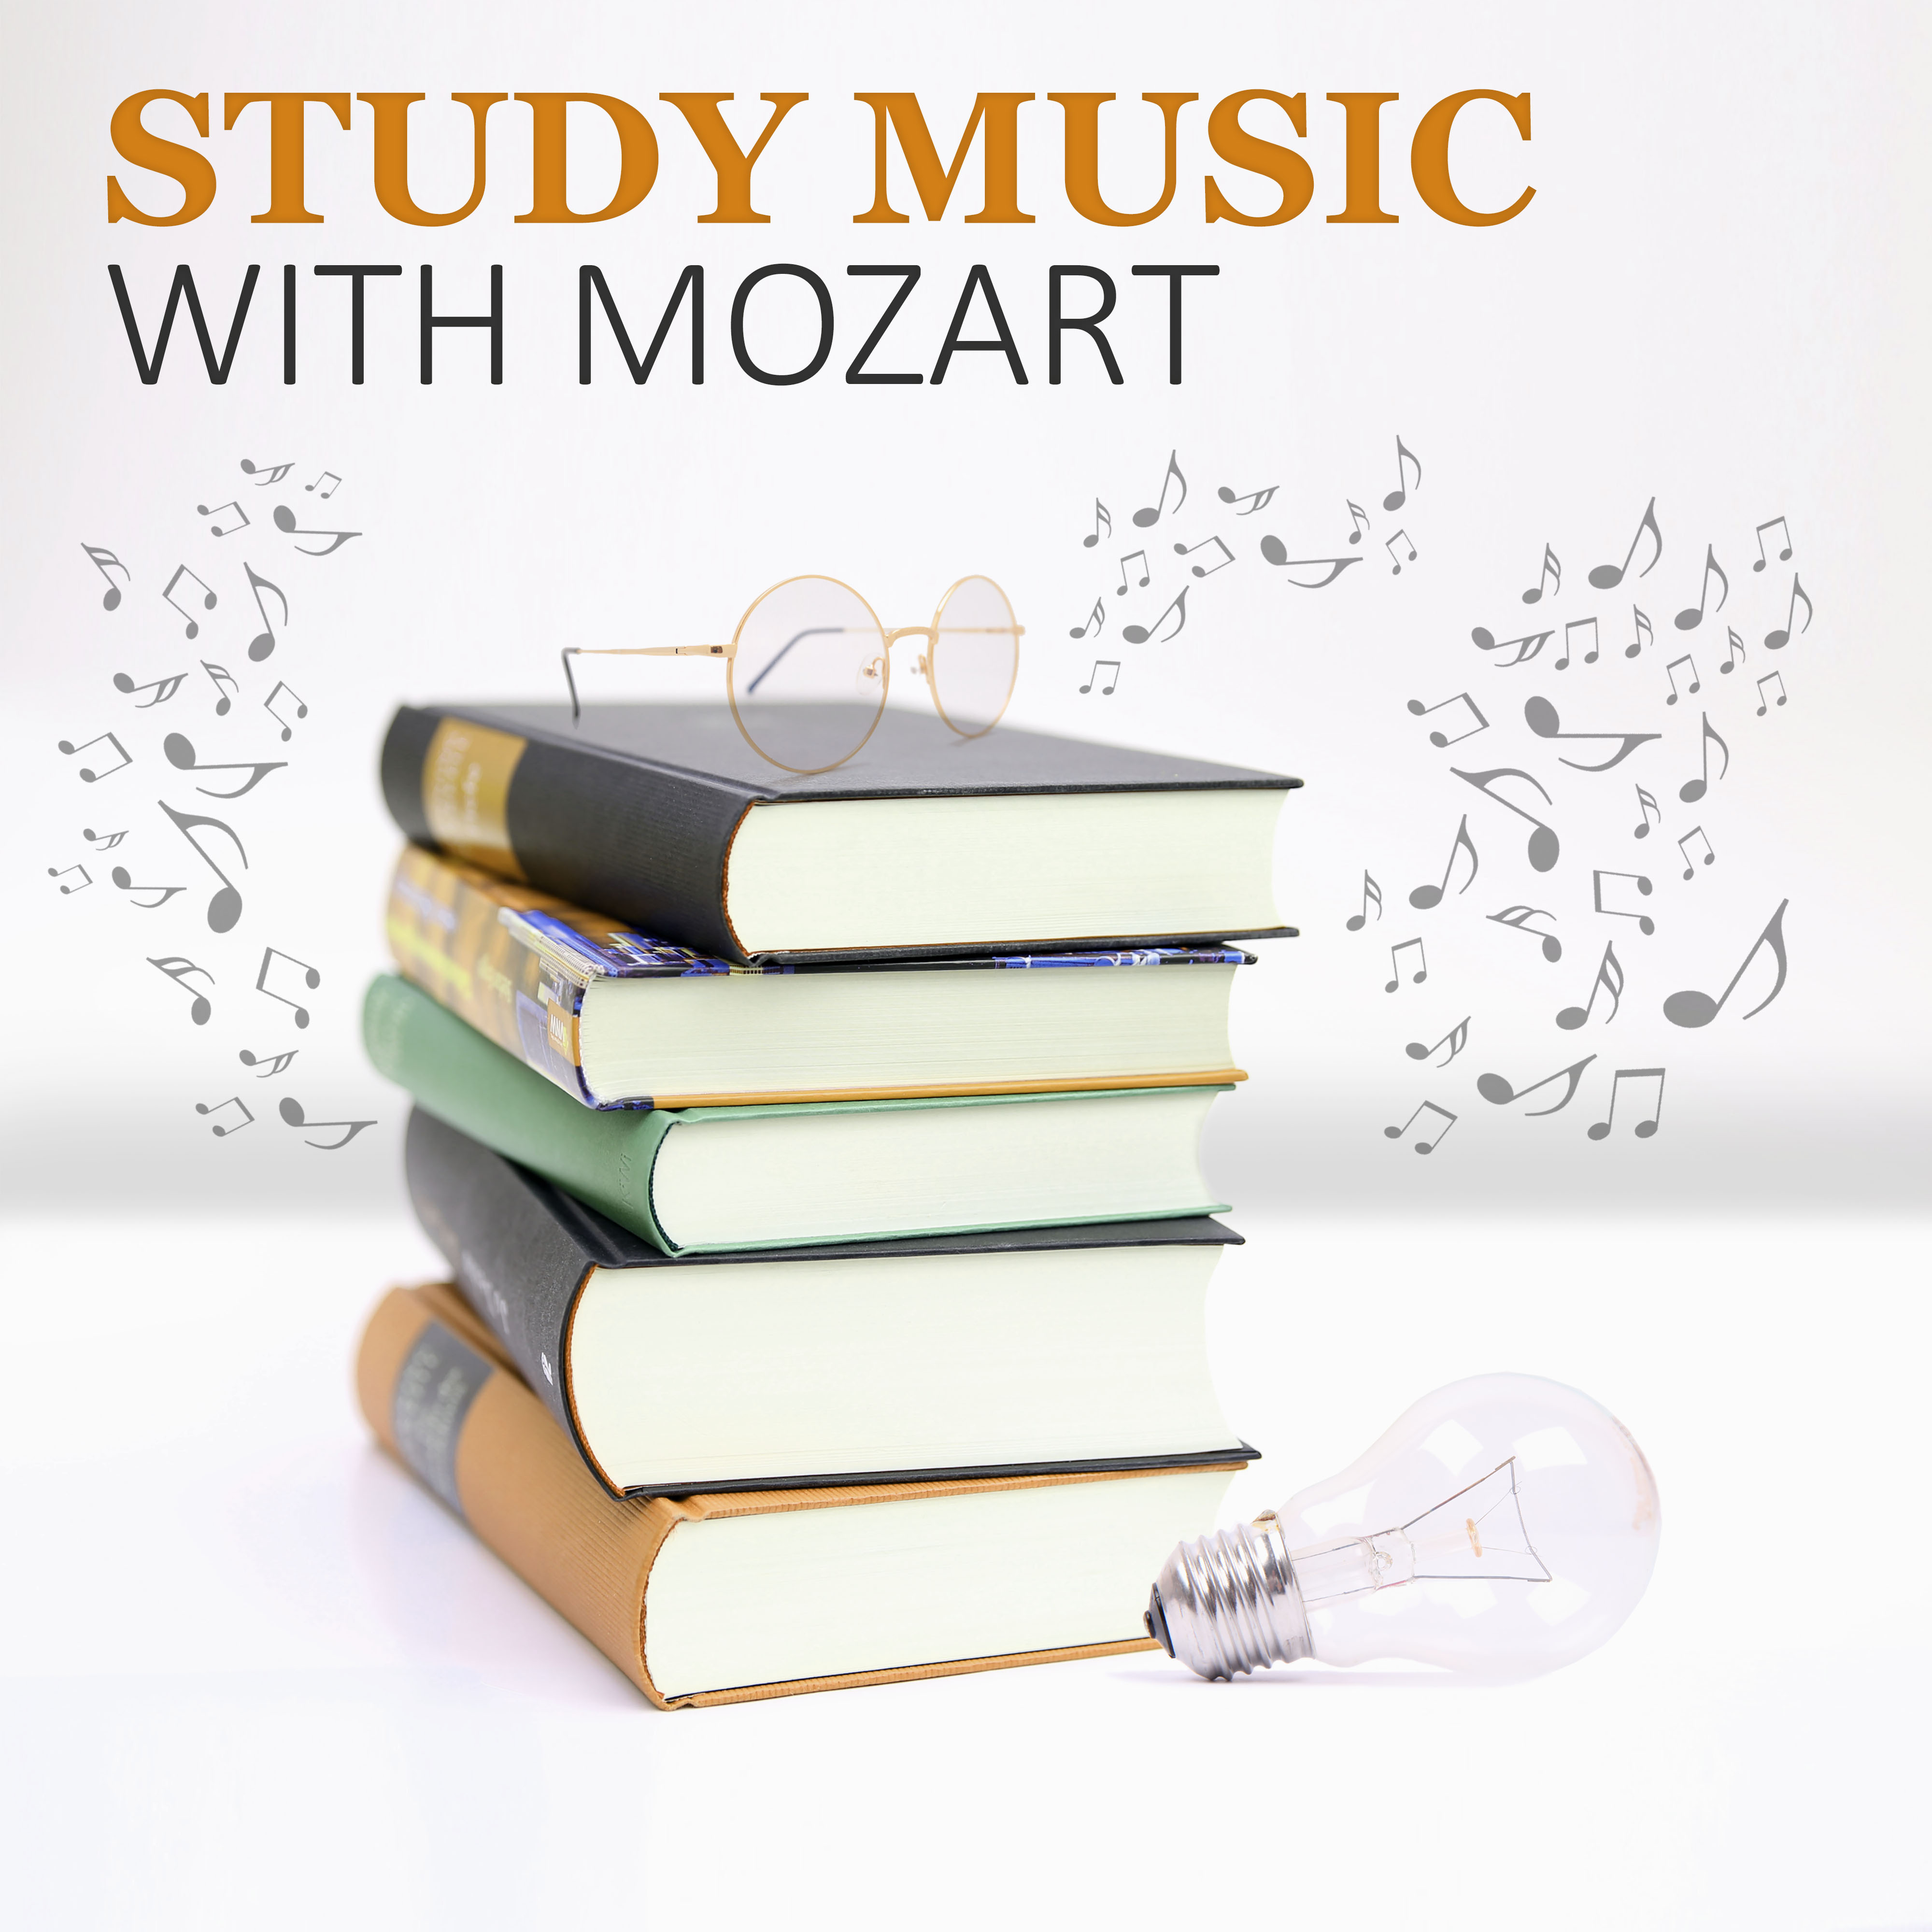 Study Music with Mozart: Classical Music for High Focus, Deep Concentration, Effective Learning, Creative Thinking